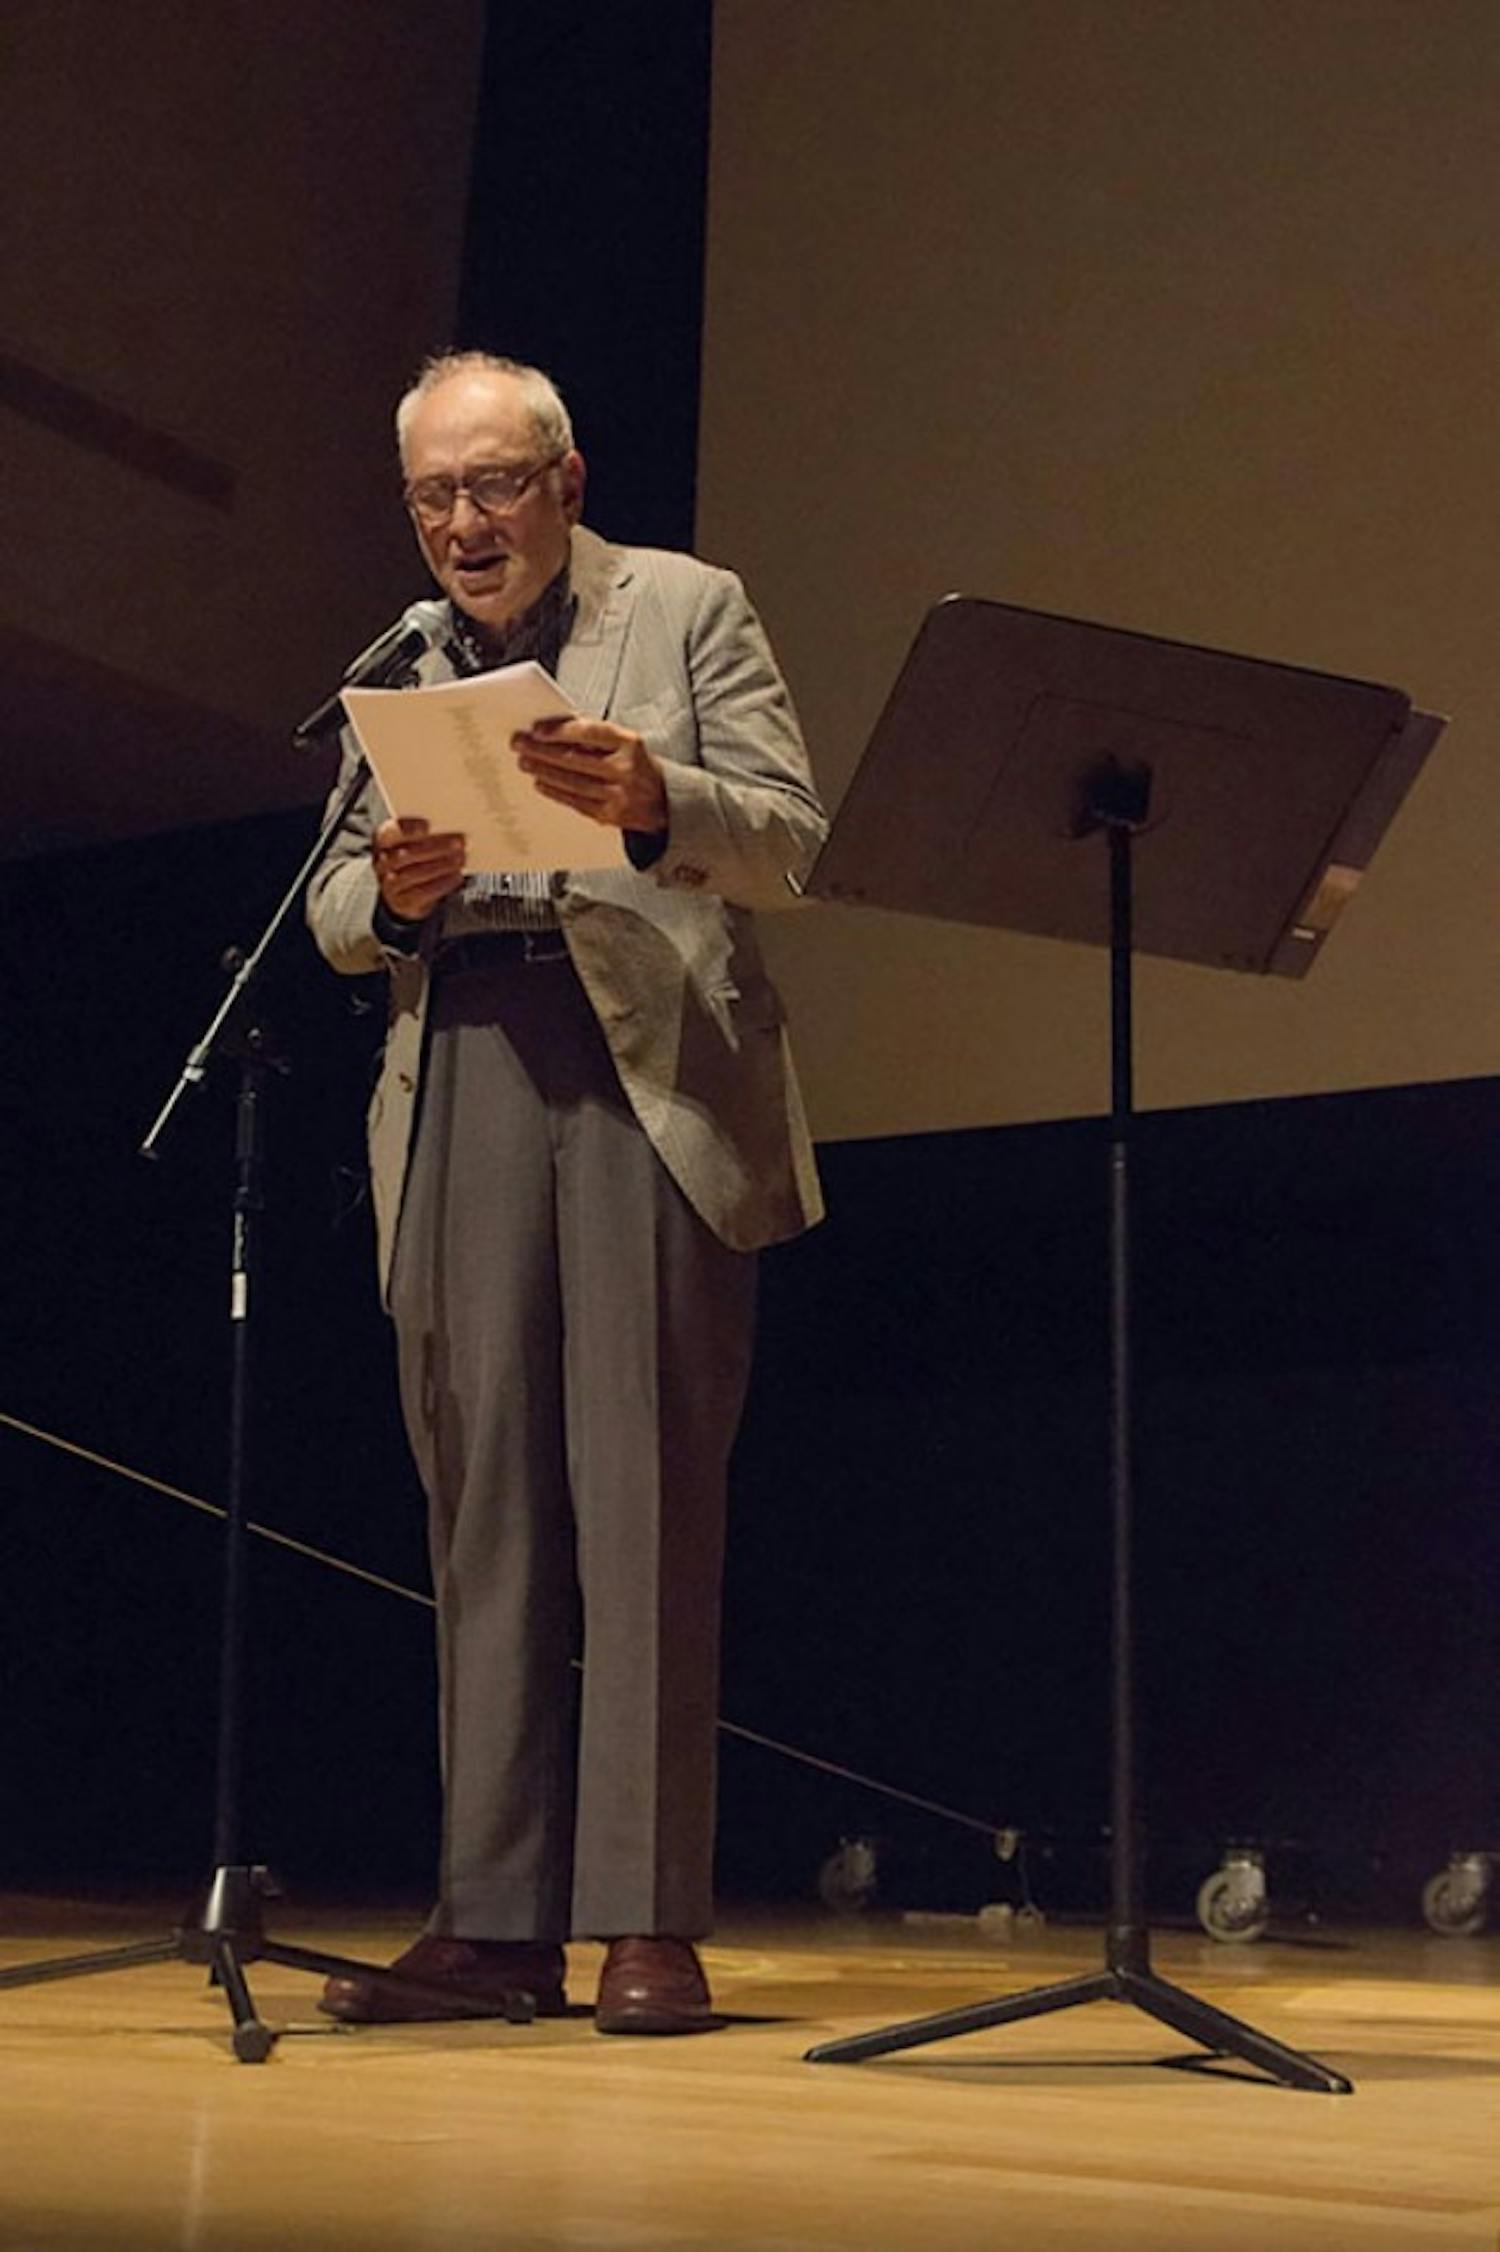 Charles Bernstein presented a lecture on Friday
as part of the 20th anniversary celebration
of the Electronic Poetry Center. Later that evening,
he also read some of his own work at the Burchfield
Penney Arts Center along with other EPC contributors.
Alex Niman, The Spectrum